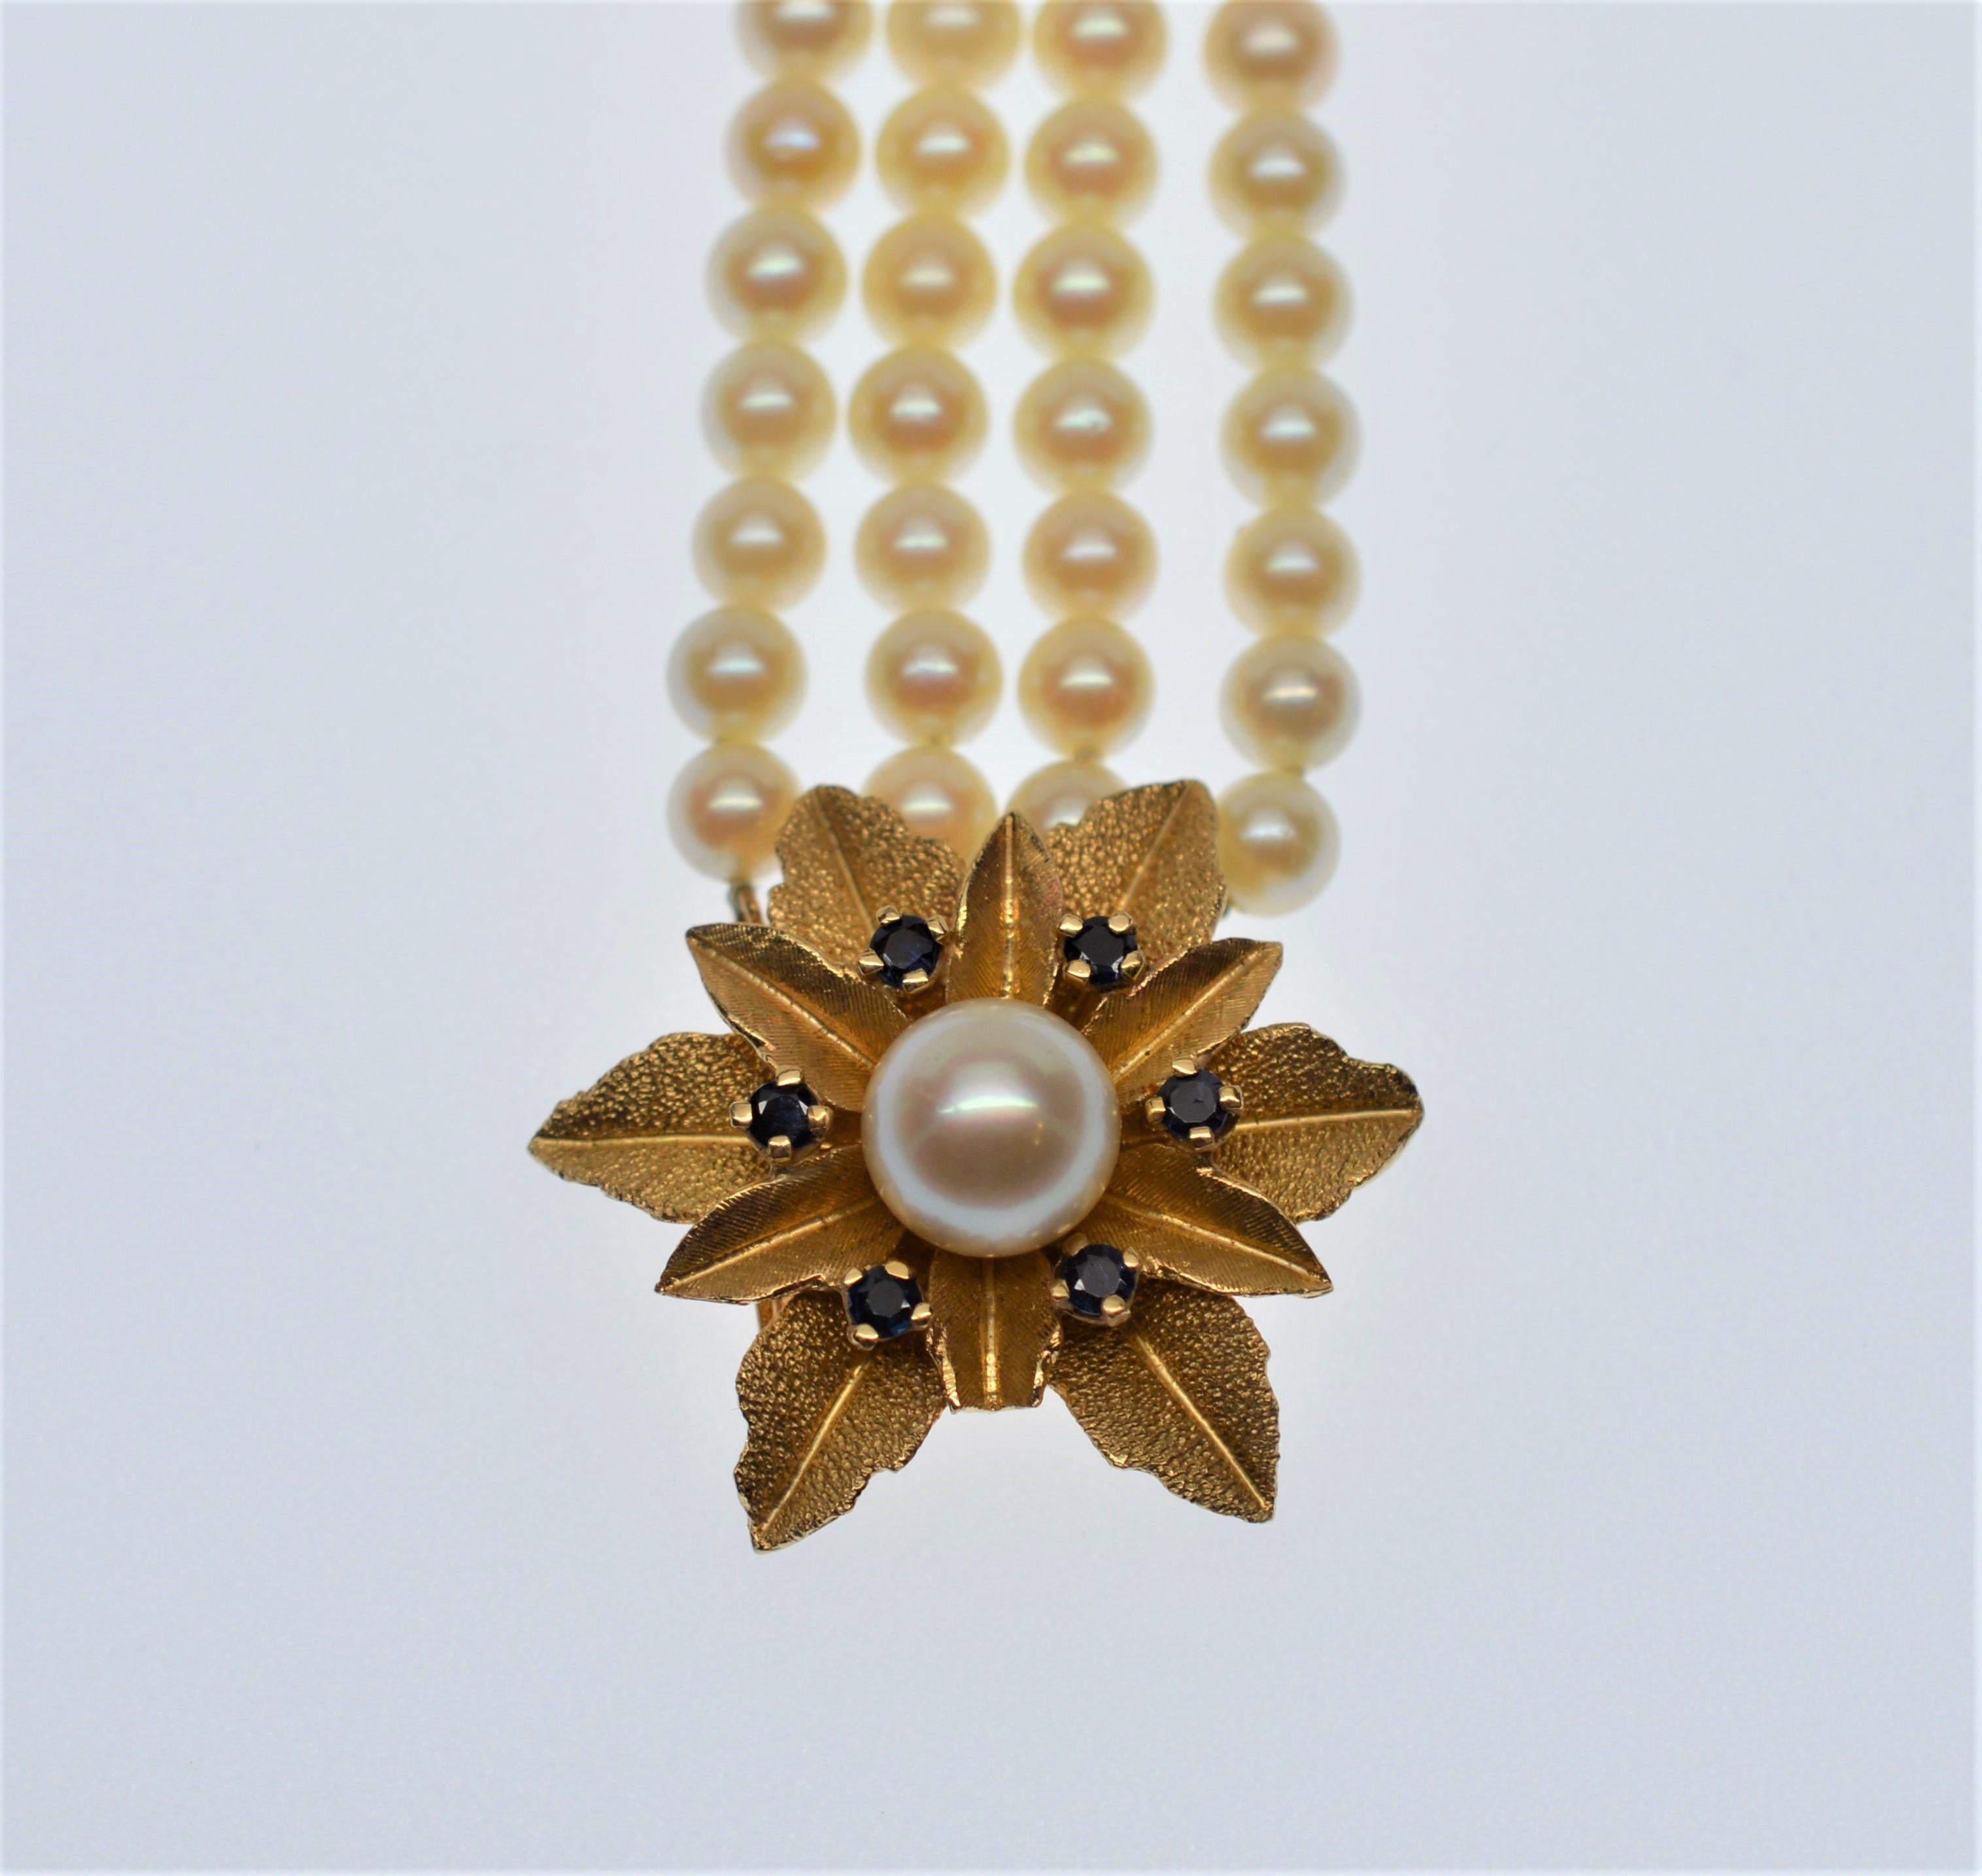 1950's Style Five Strand Pearl Bracelet with feature 14 Karat Gold & Sapphire Floral Burst Clasp. Made of over one hundred 5 1/2 mm fine genuine AAA Akoya Pearls, this finely constructed 7 inch bracelet blooms with personality featuring a large